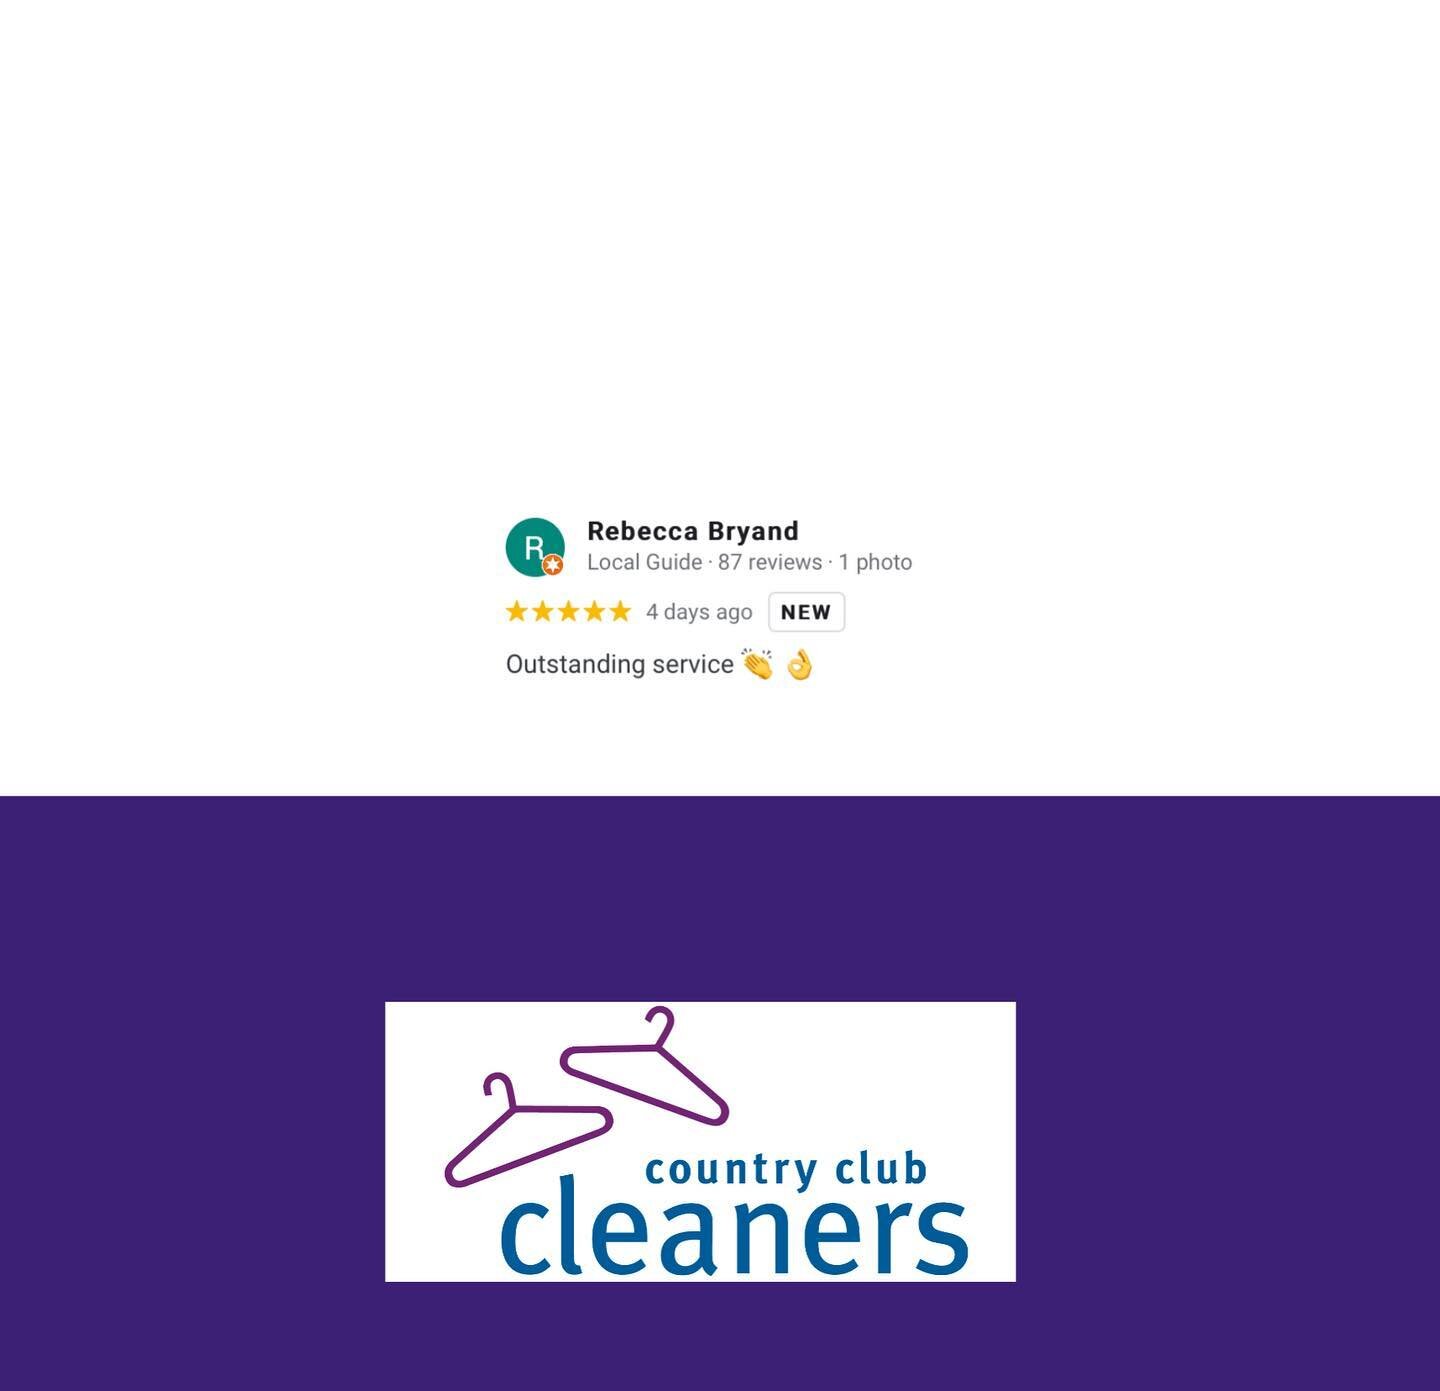 Thanks for the review Rebecca! We appreciate the support!
.
.
.

Country Club Cleaners San Ramon https://g.page/r/CfsxBJOUxqa7EBM/review